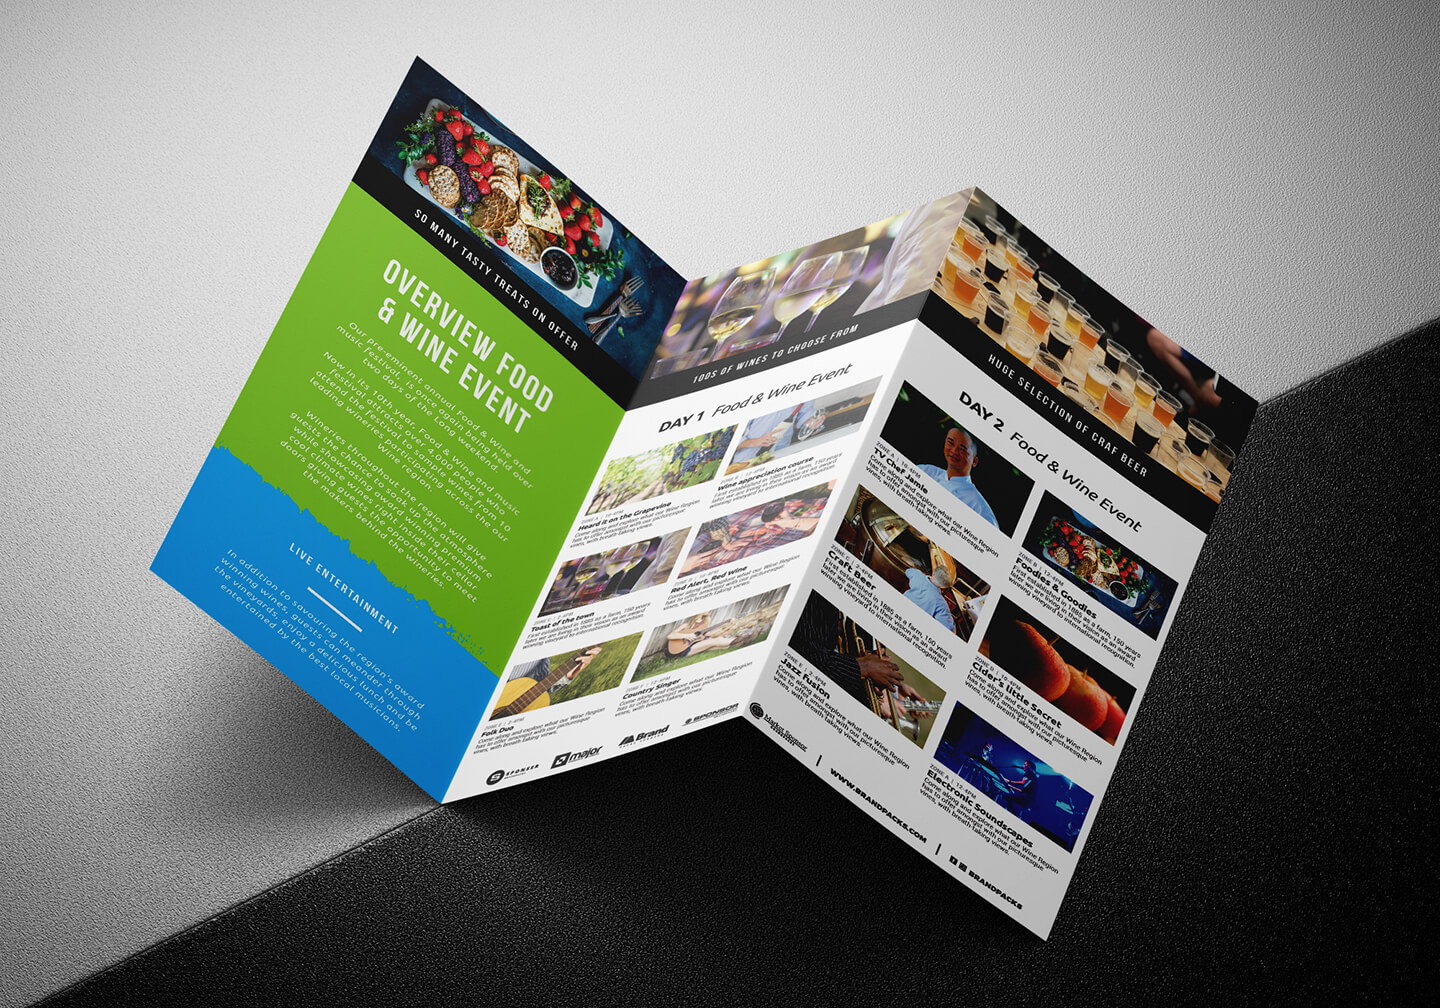 Free Tri Fold Brochure Template For Events & Festivals – Psd Throughout Adobe Illustrator Tri Fold Brochure Template